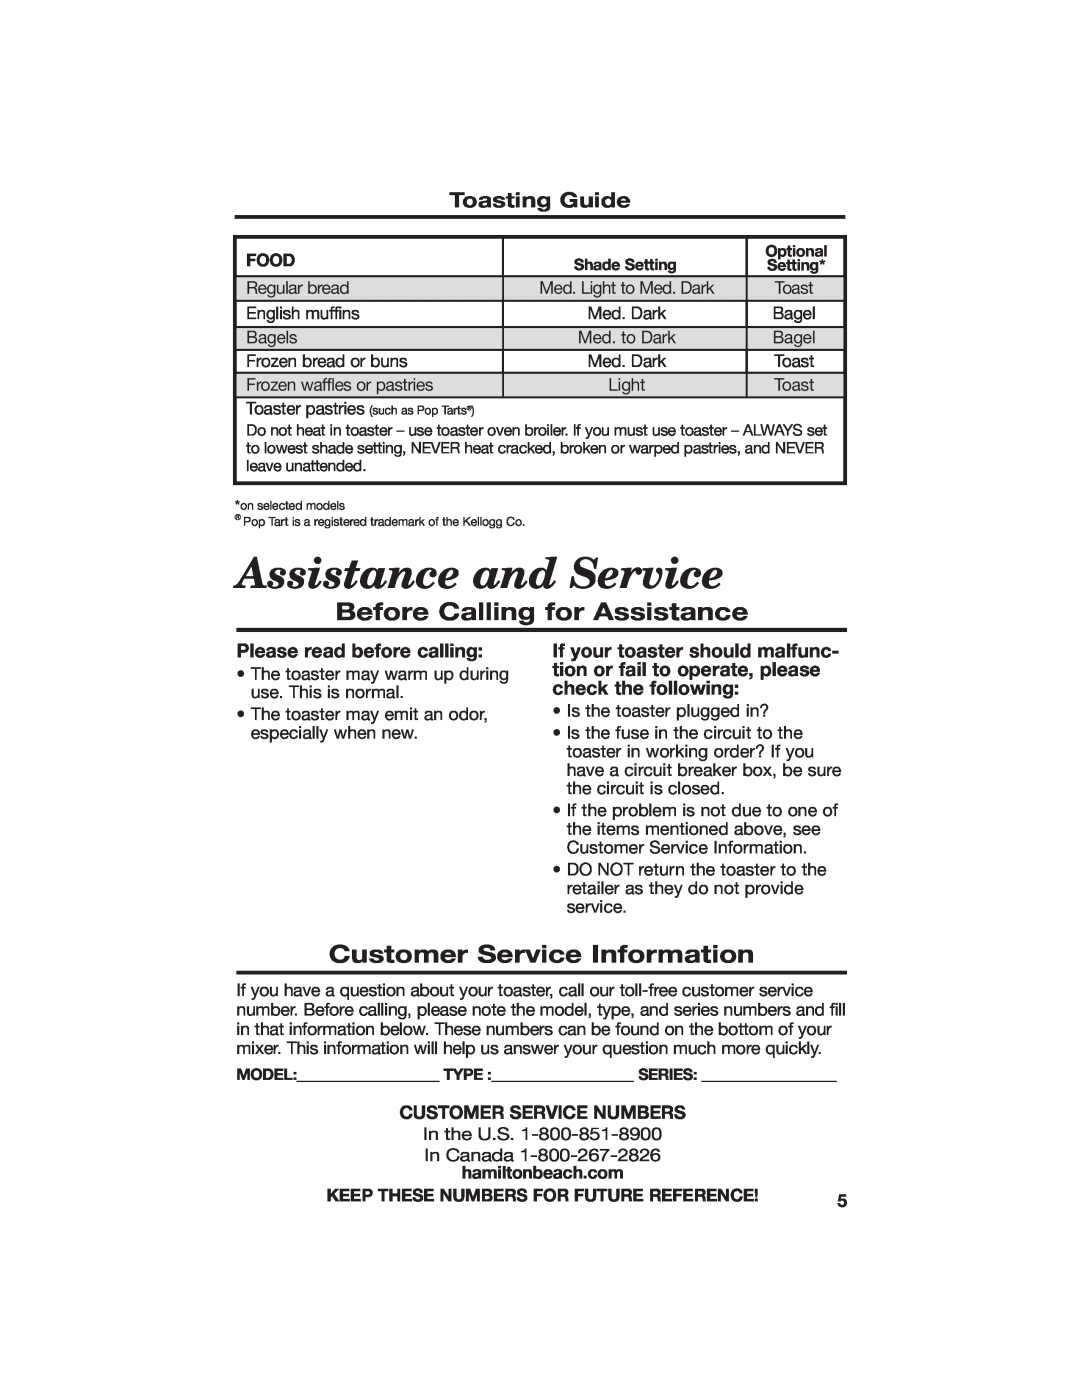 Hamilton Beach All-Metal Toaster manual Assistance and Service, Before Calling for Assistance, Customer Service Information 